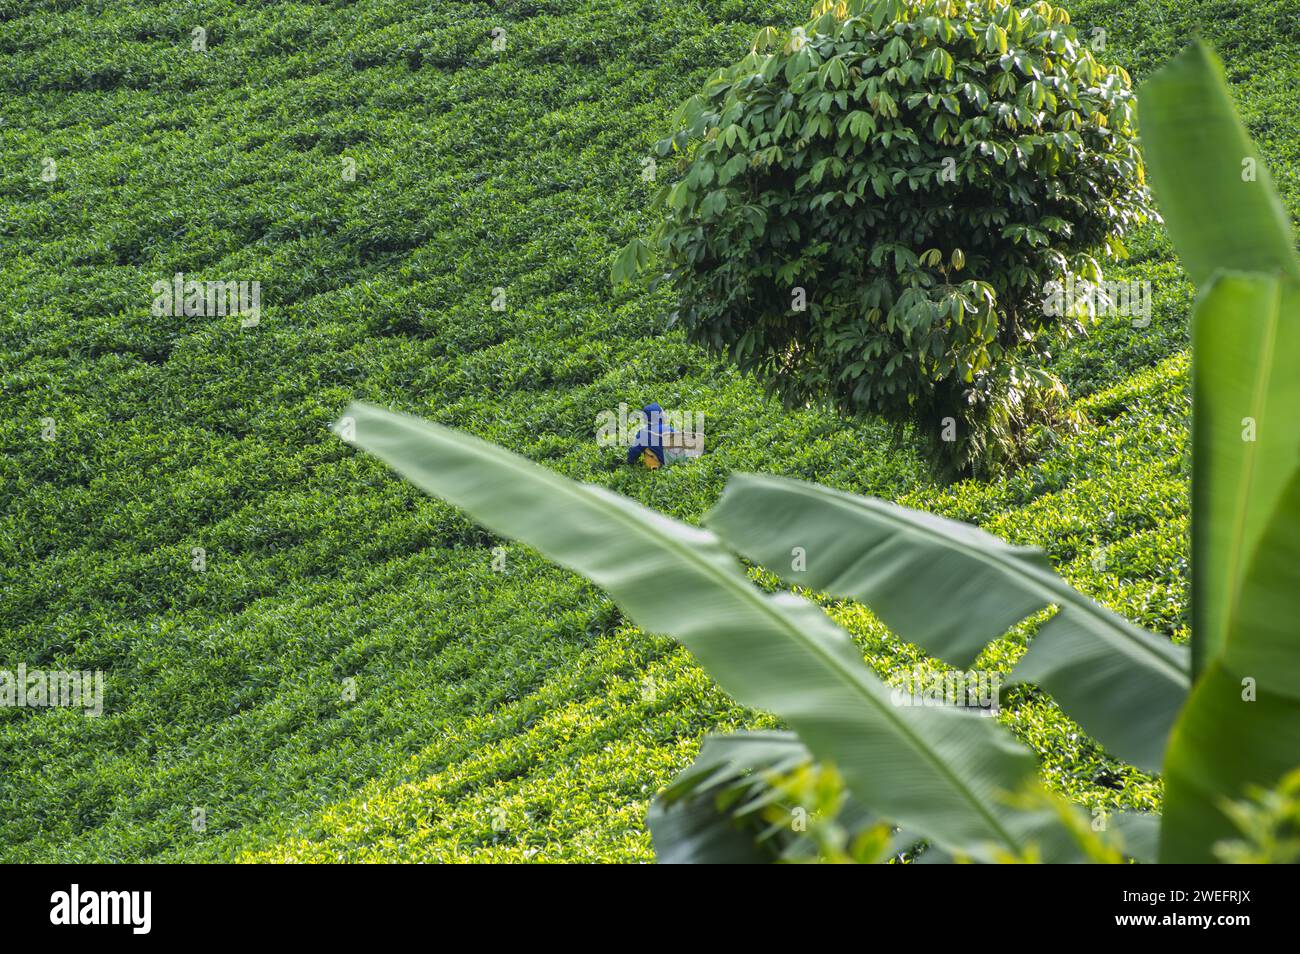 Tea plantation near Nyungwe National Park in Southwest Rwanda with vivid green leaves against a lush forest background at high altitudes Stock Photo